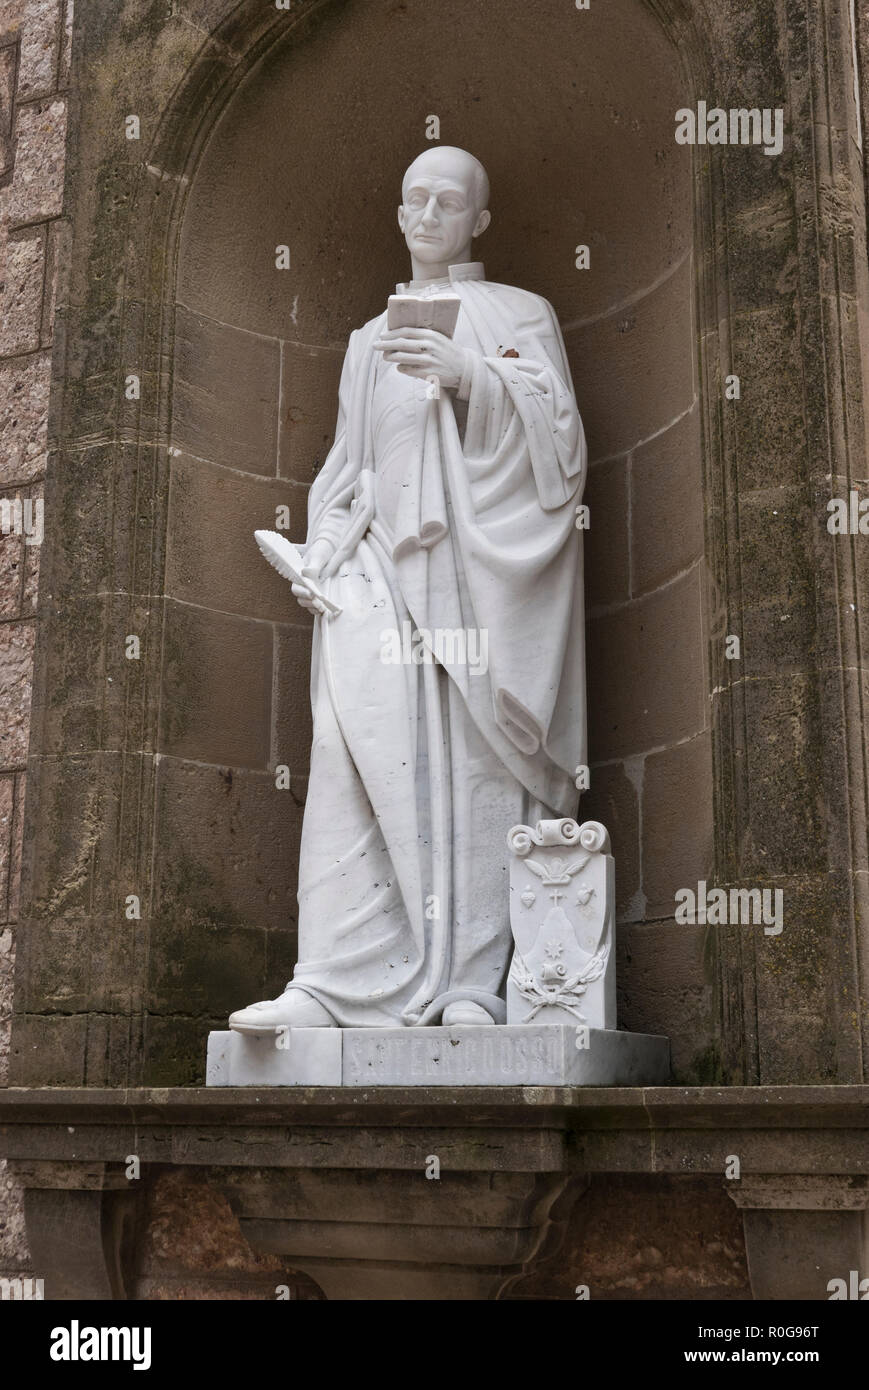 A religious statue in a cloister in the courtyard at the Benedictine abbey Santa Maria de Montserrat, Barcelona, Spain Stock Photo